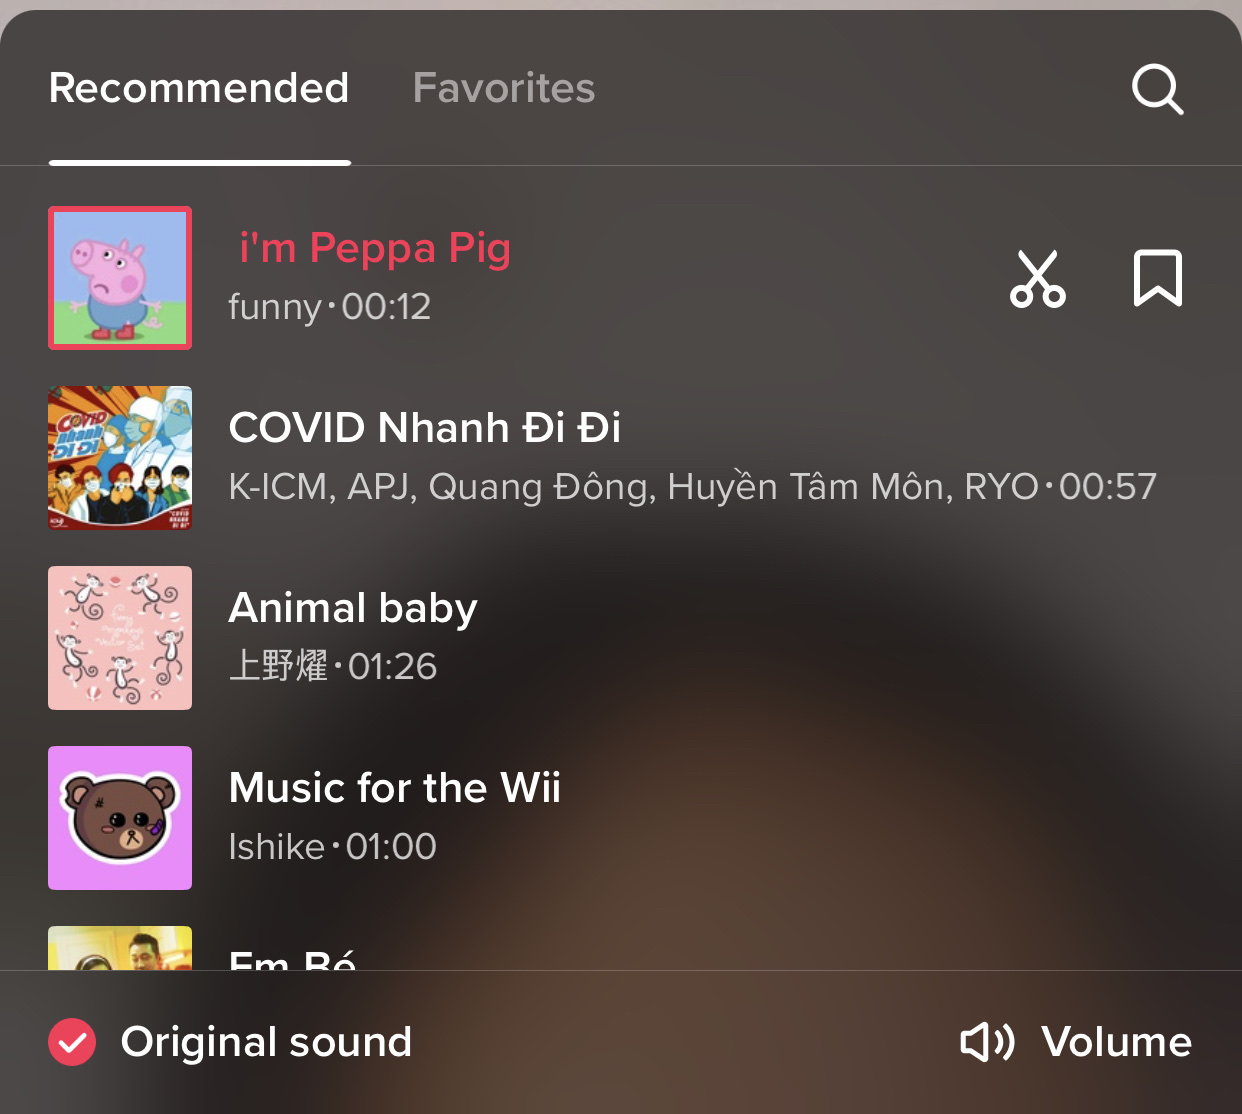 Recommended sounds on TikTok